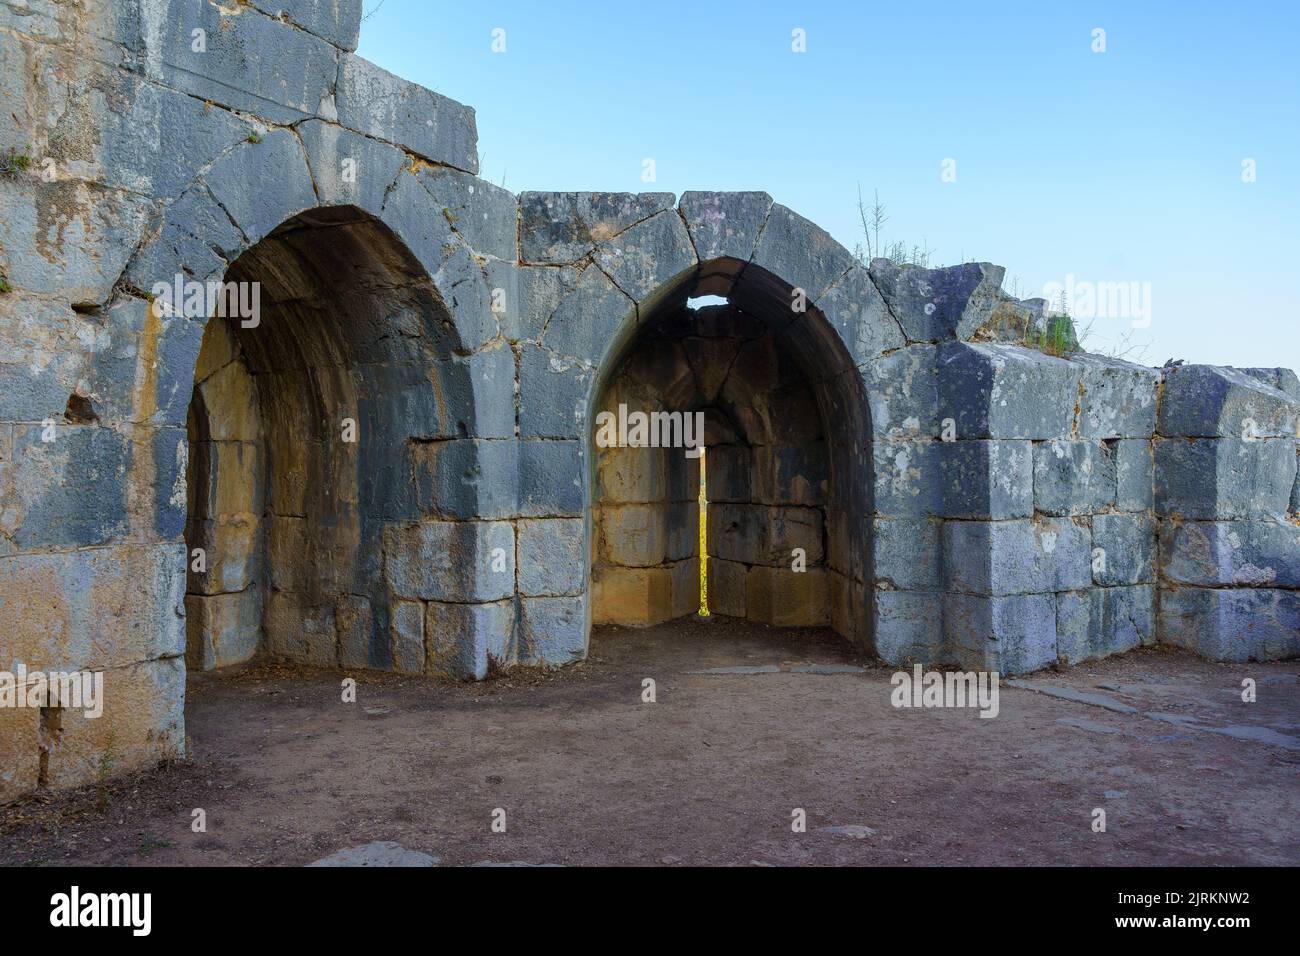 View of a guard tower in the medieval Nimrod fortress, the Golan Heights, Northern Israel Stock Photo